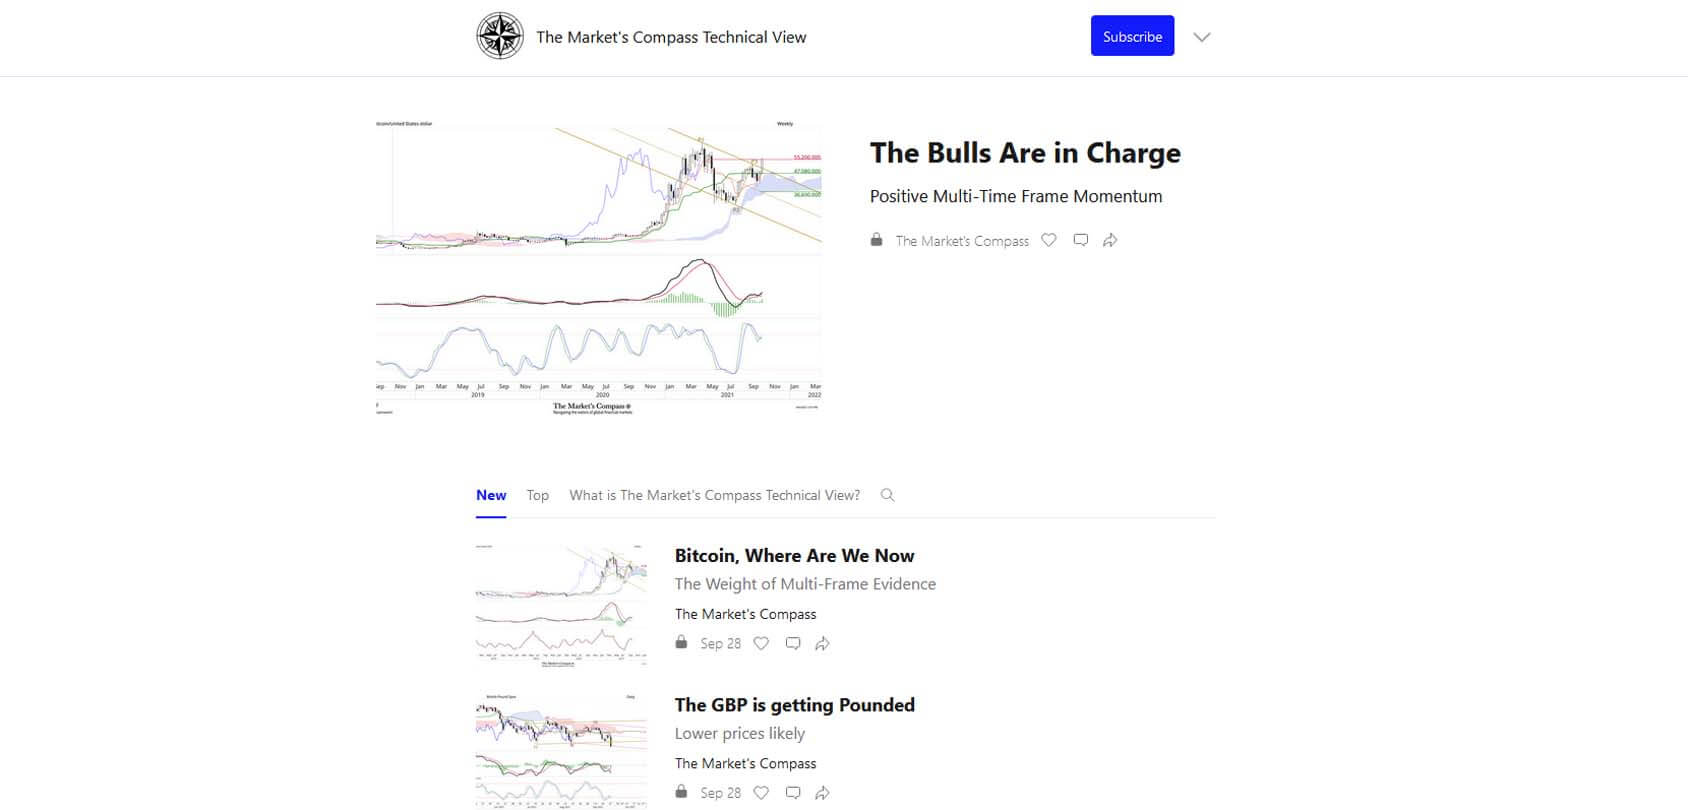 The Market's Compass Technical View Homepage